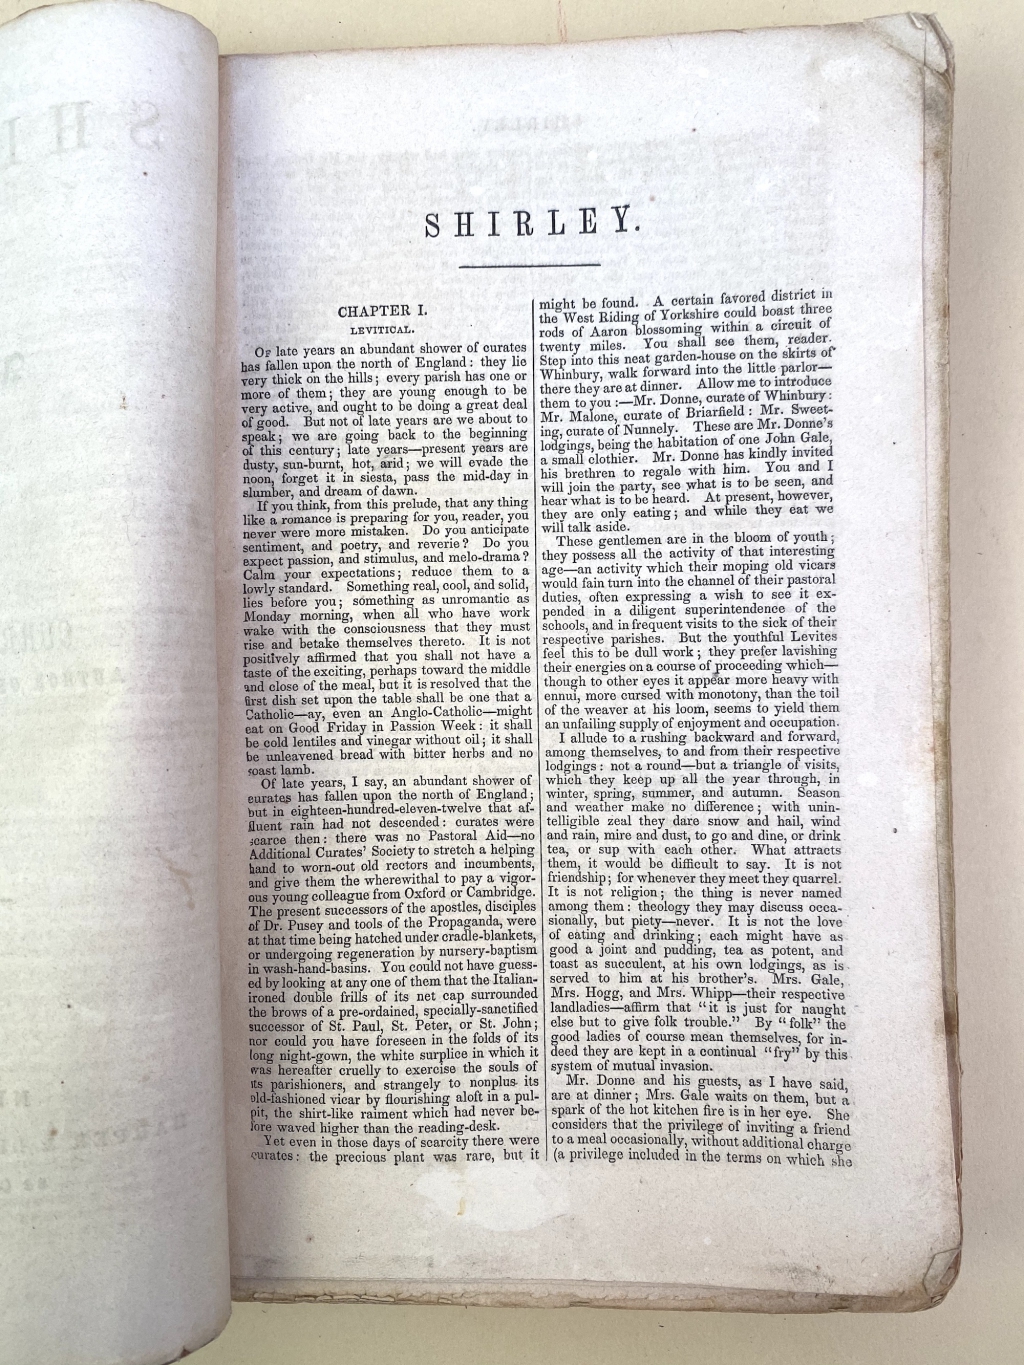 Harpers issued the first American edition of Shirley inexpensively in a very compressed two-column format similar to the typesetting in newspapers.